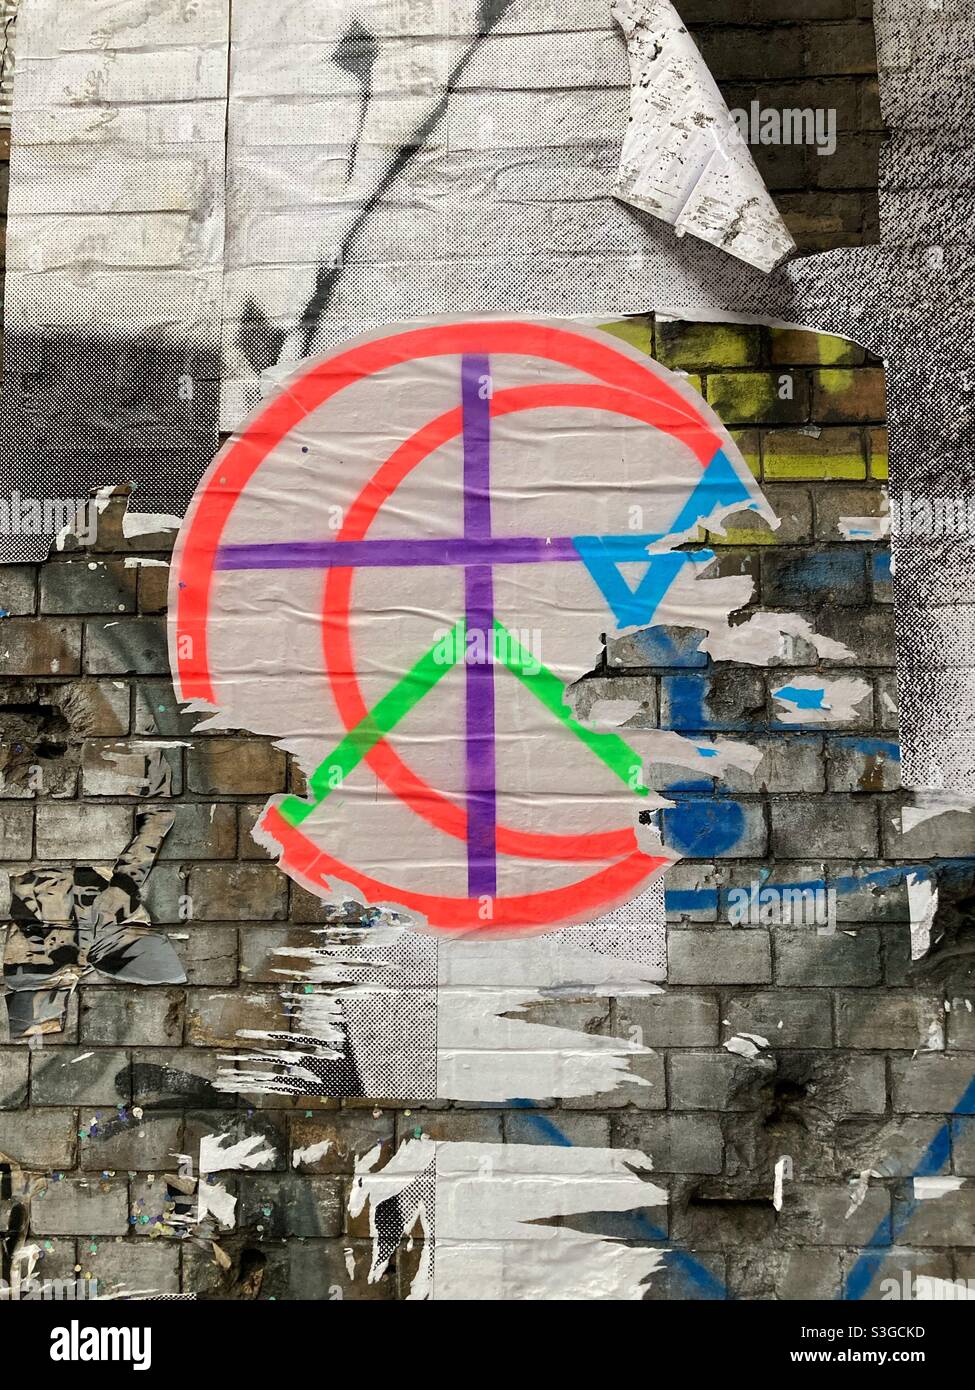 A Poster on a Wall showing combined popular symbols: Peace, cross, Star of David; partly ripped of Stock Photo